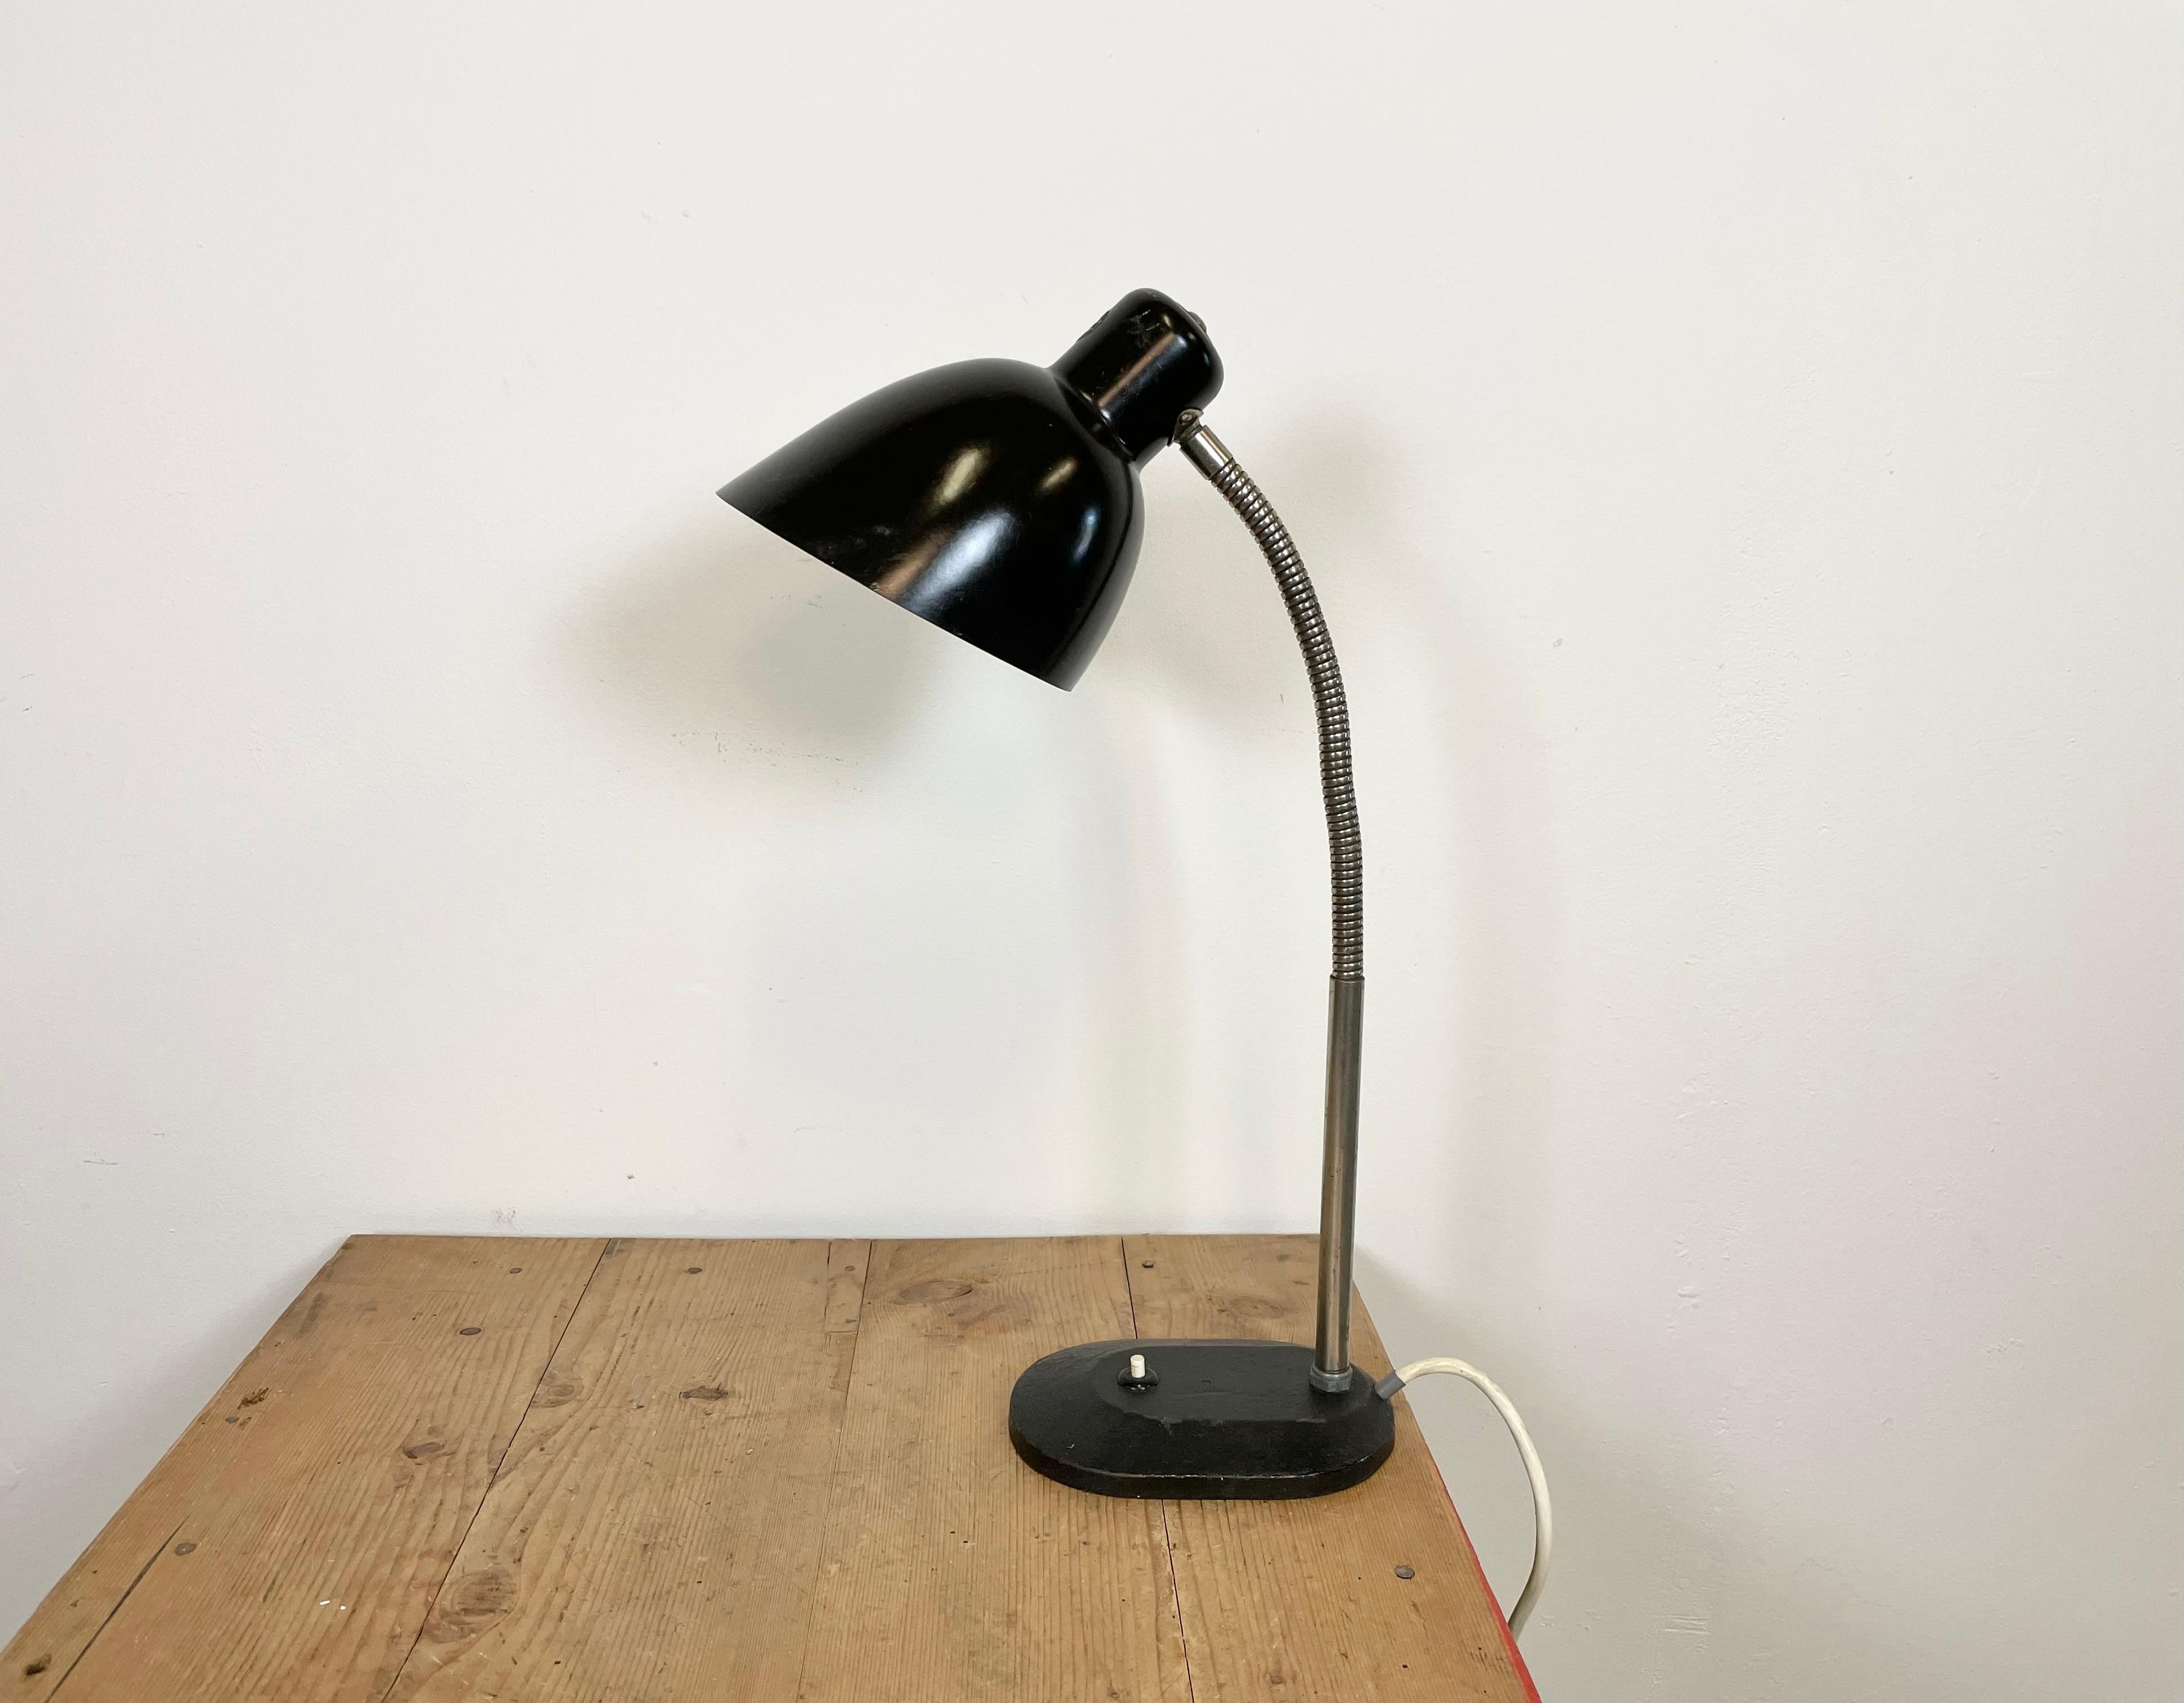 Vintage German bakelite desk lamp in Bauhaus style.It features a black bakelite shade, chromed gooseneck and cast iron base with original switch. The socket requires E 27 light bulbs The diameter of the shade is 17 cm.